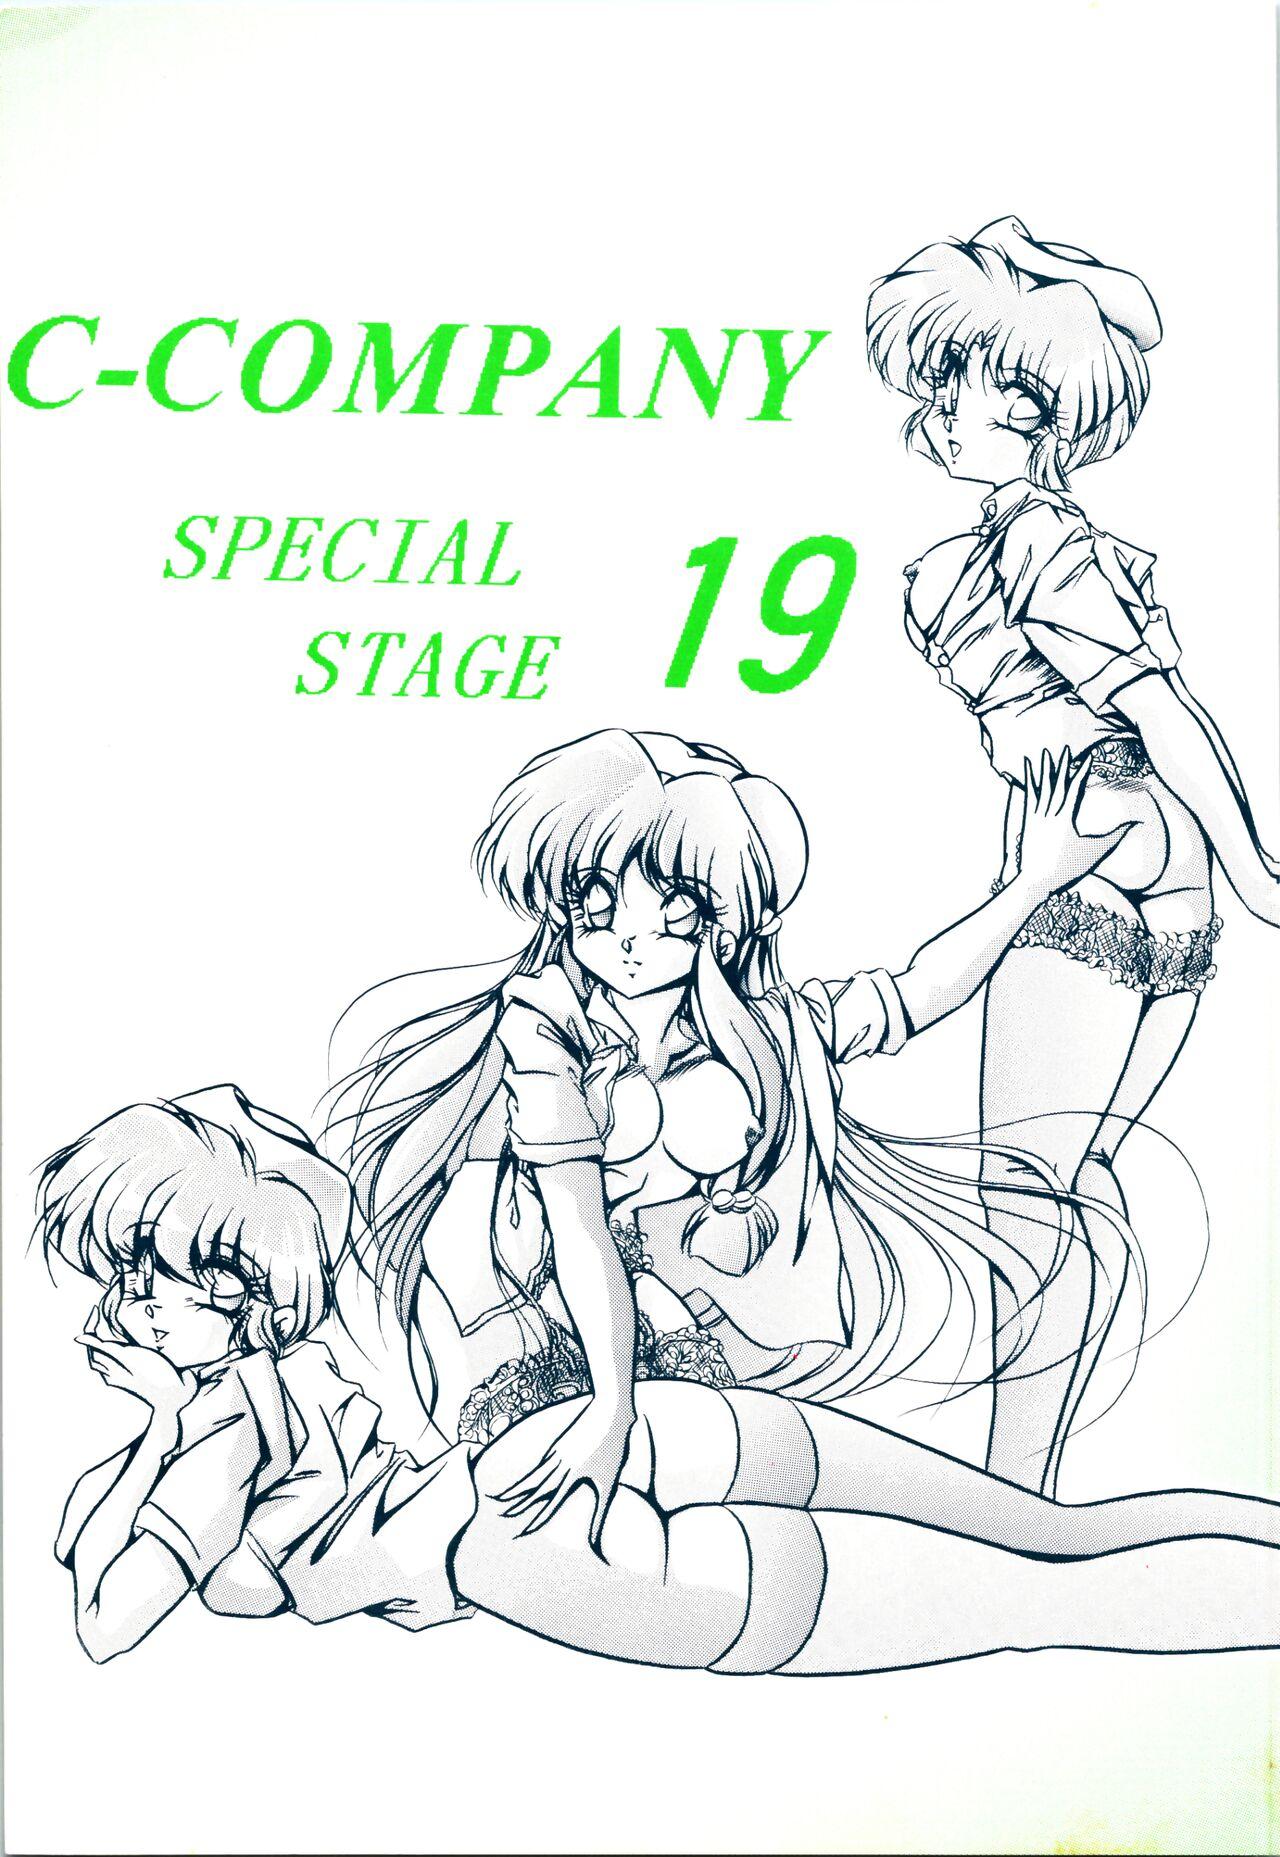 Moms C-COMPANY SPECIAL STAGE 19 - Ranma 12 Boys - Picture 1